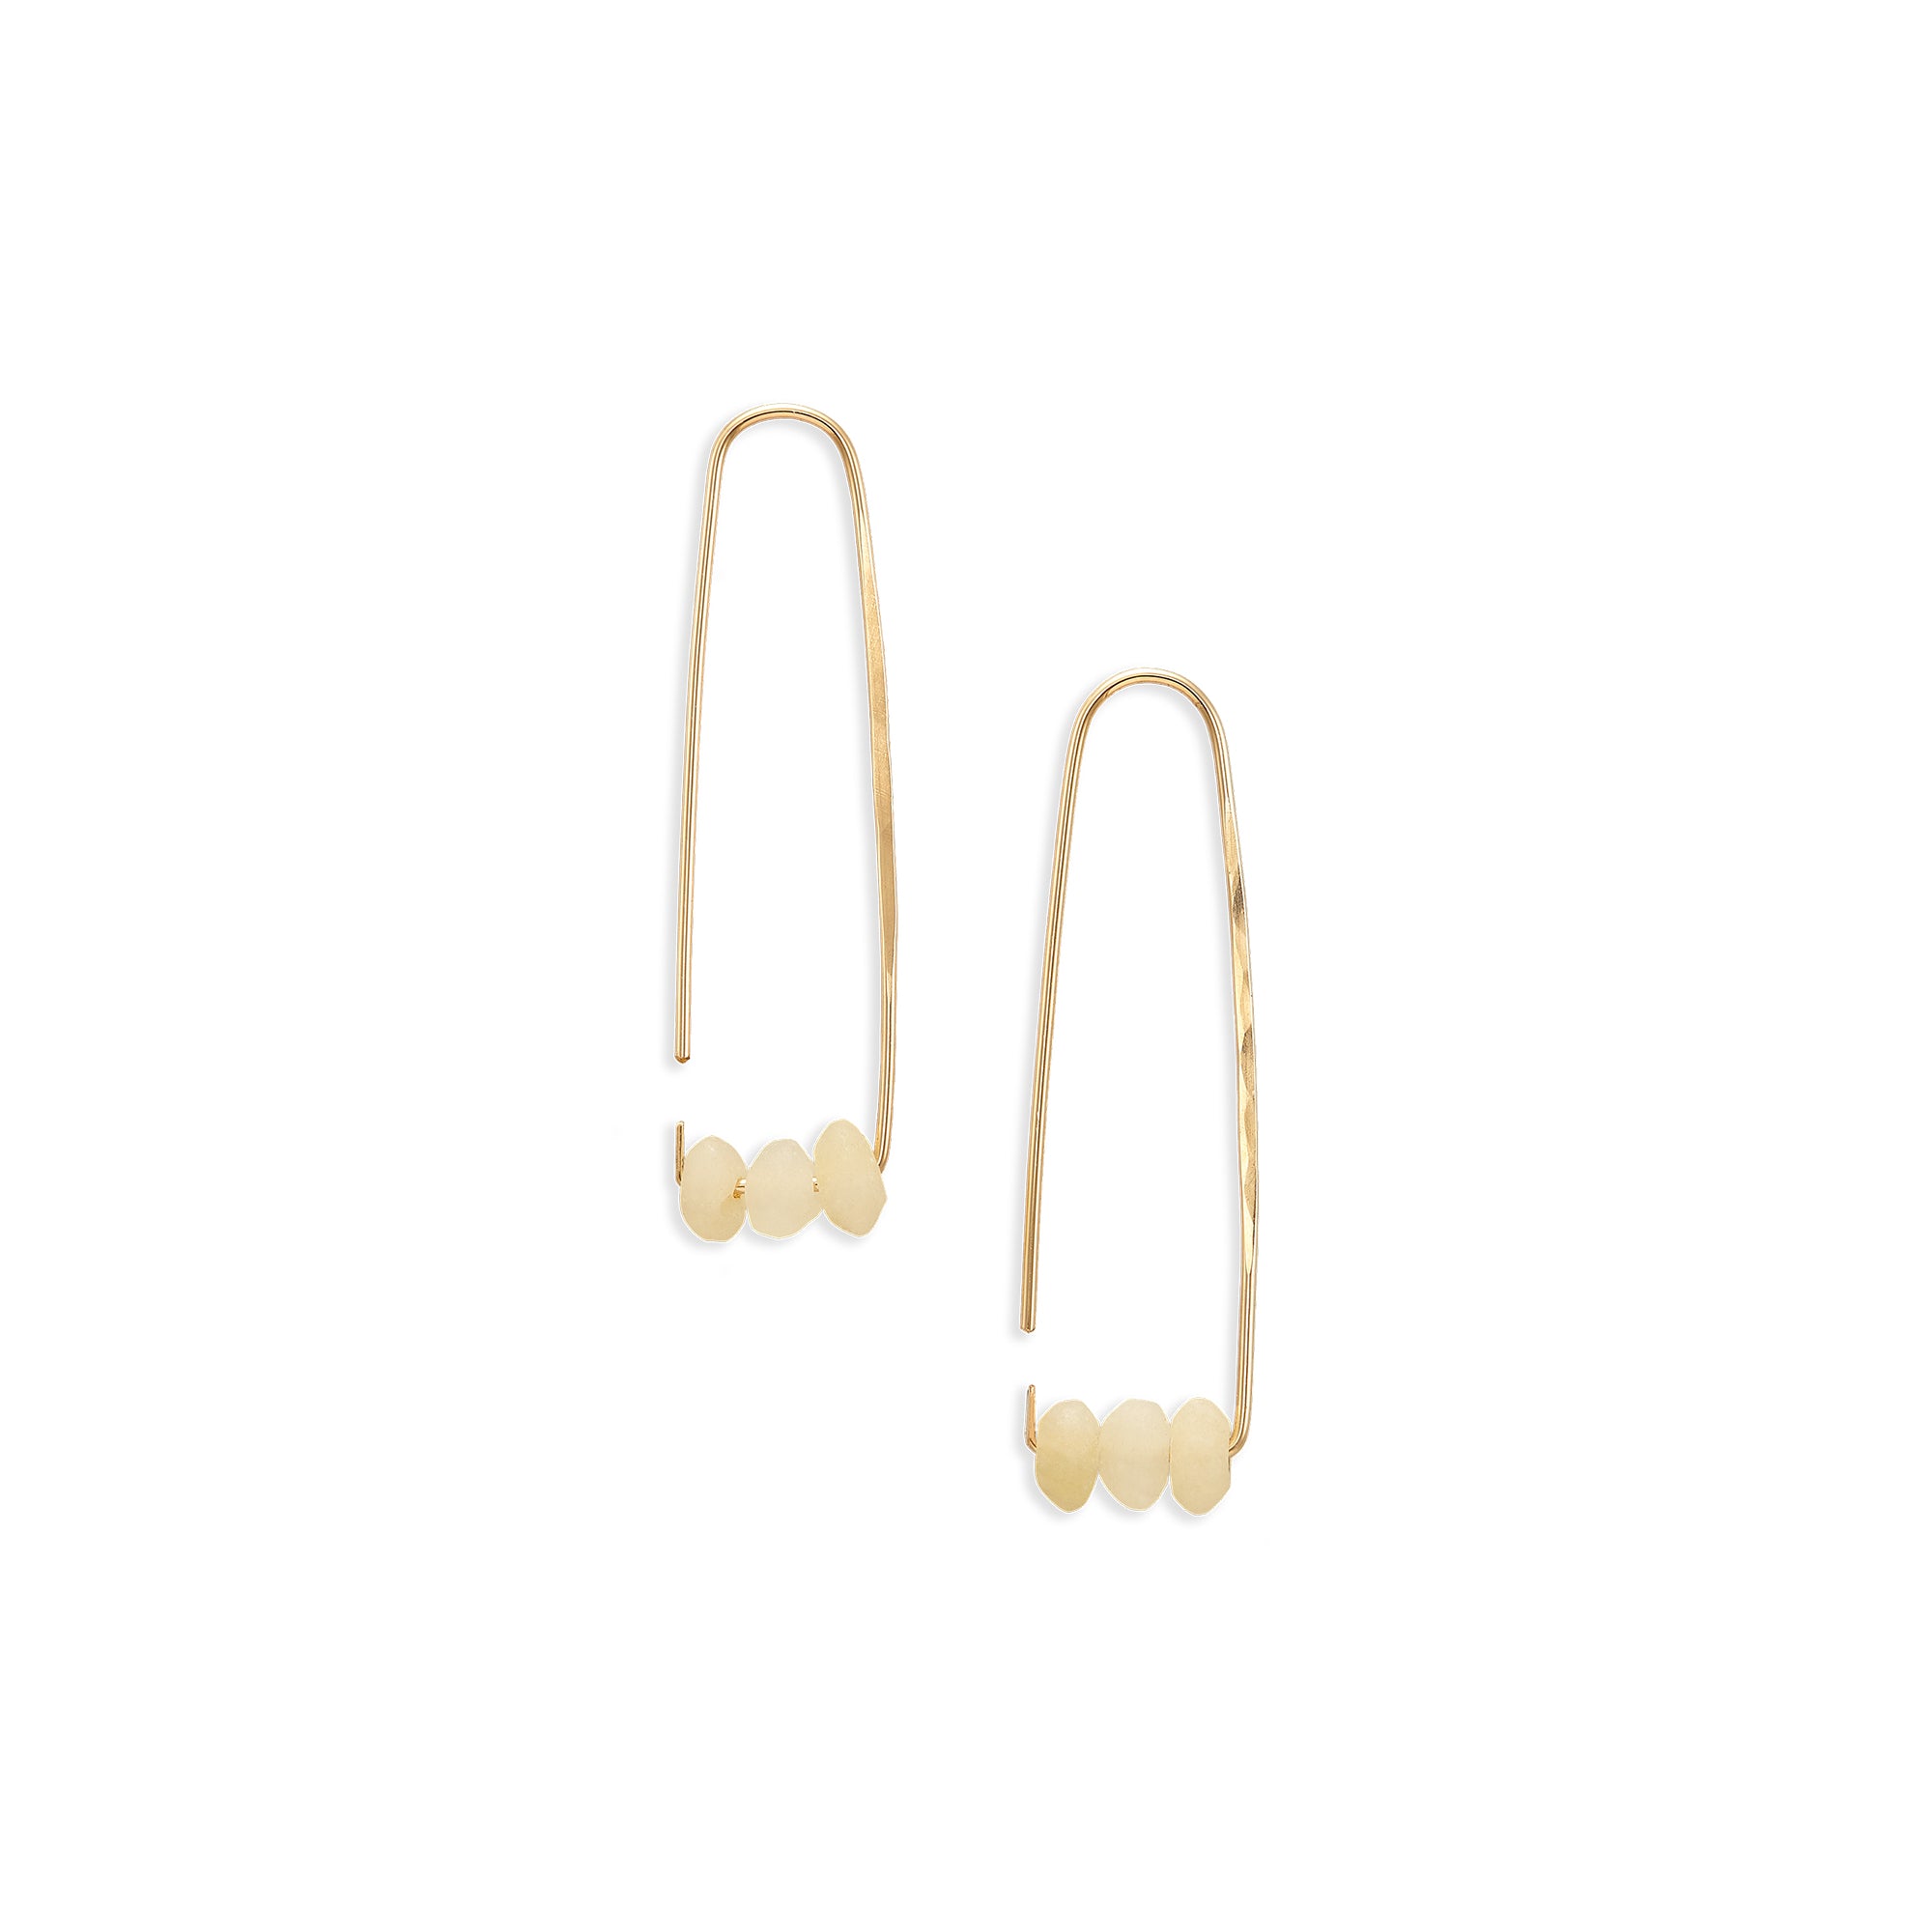 The Elongated Aura Hoops are made of 14k yellow gold fill or sterling silver and adorned with your choice of beads.